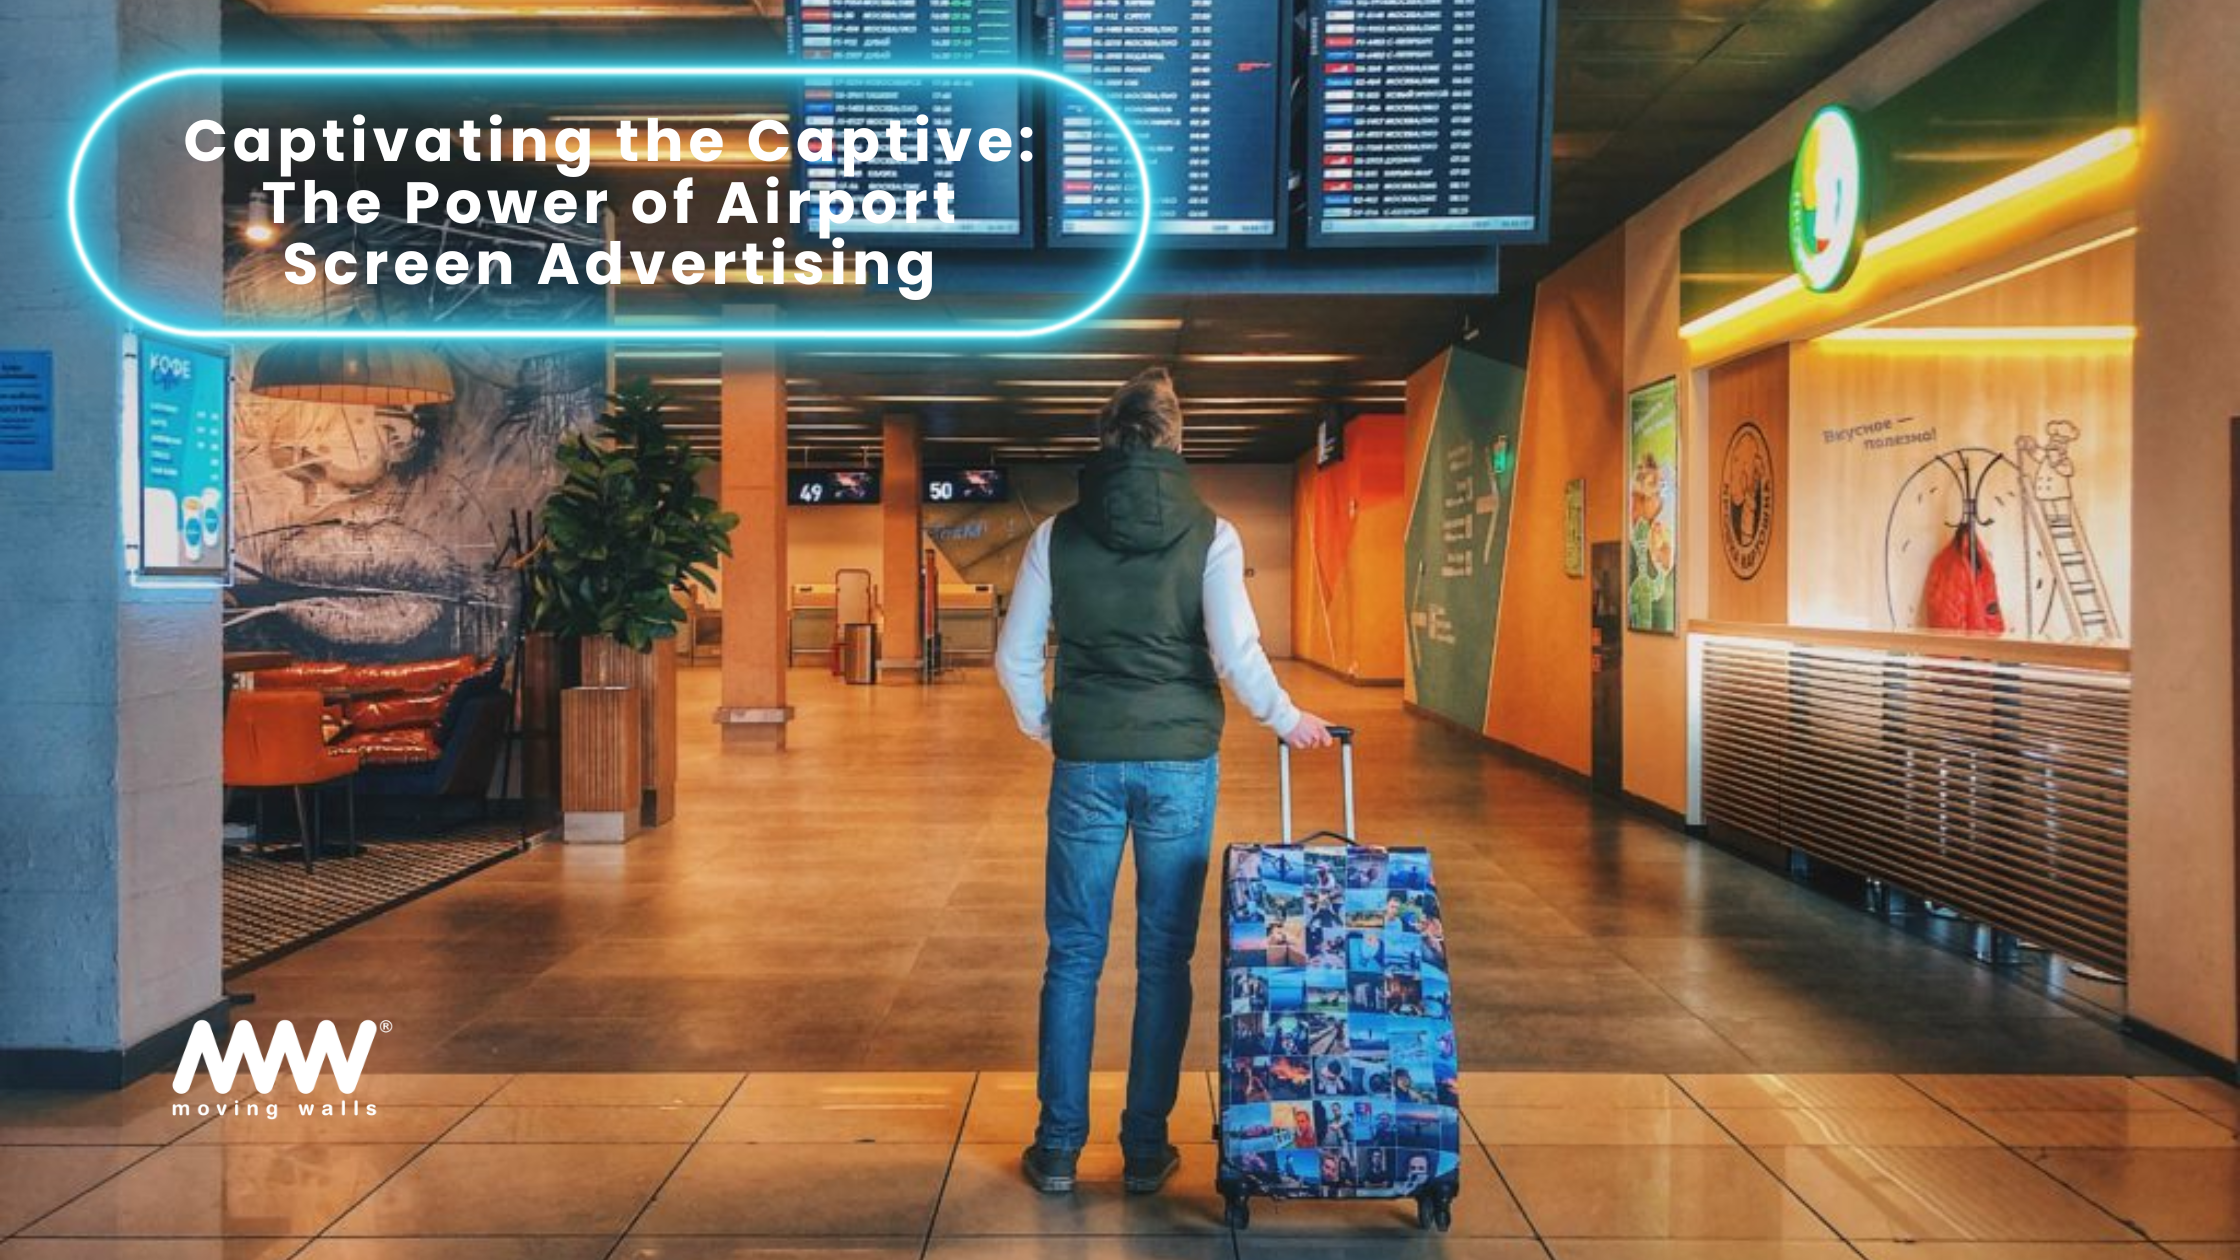 Captivating the Captive: The Power of Airport Screen Advertising